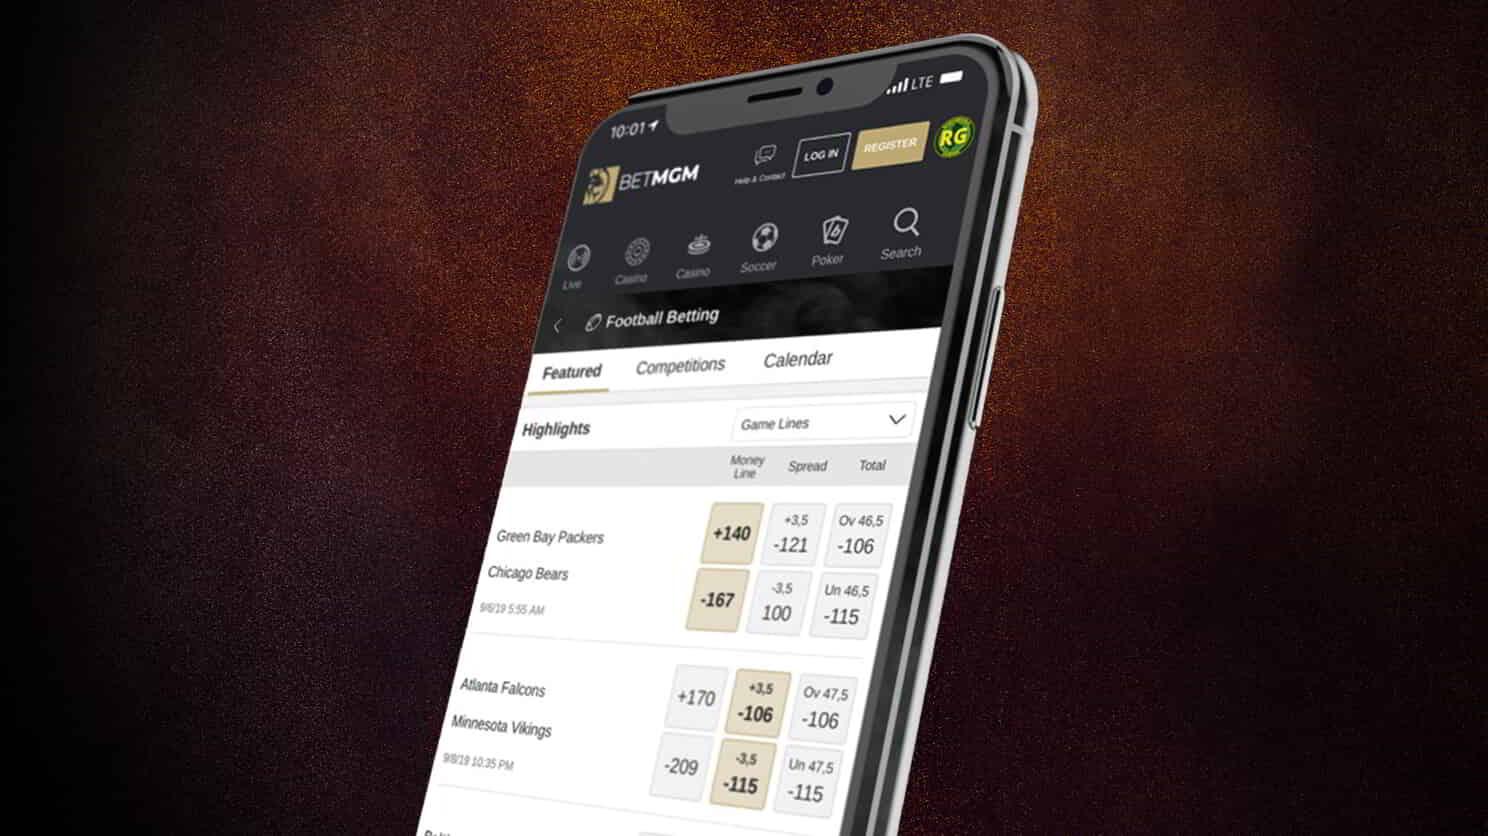 At Last, The Secret To Ipl Betting App Is Revealed